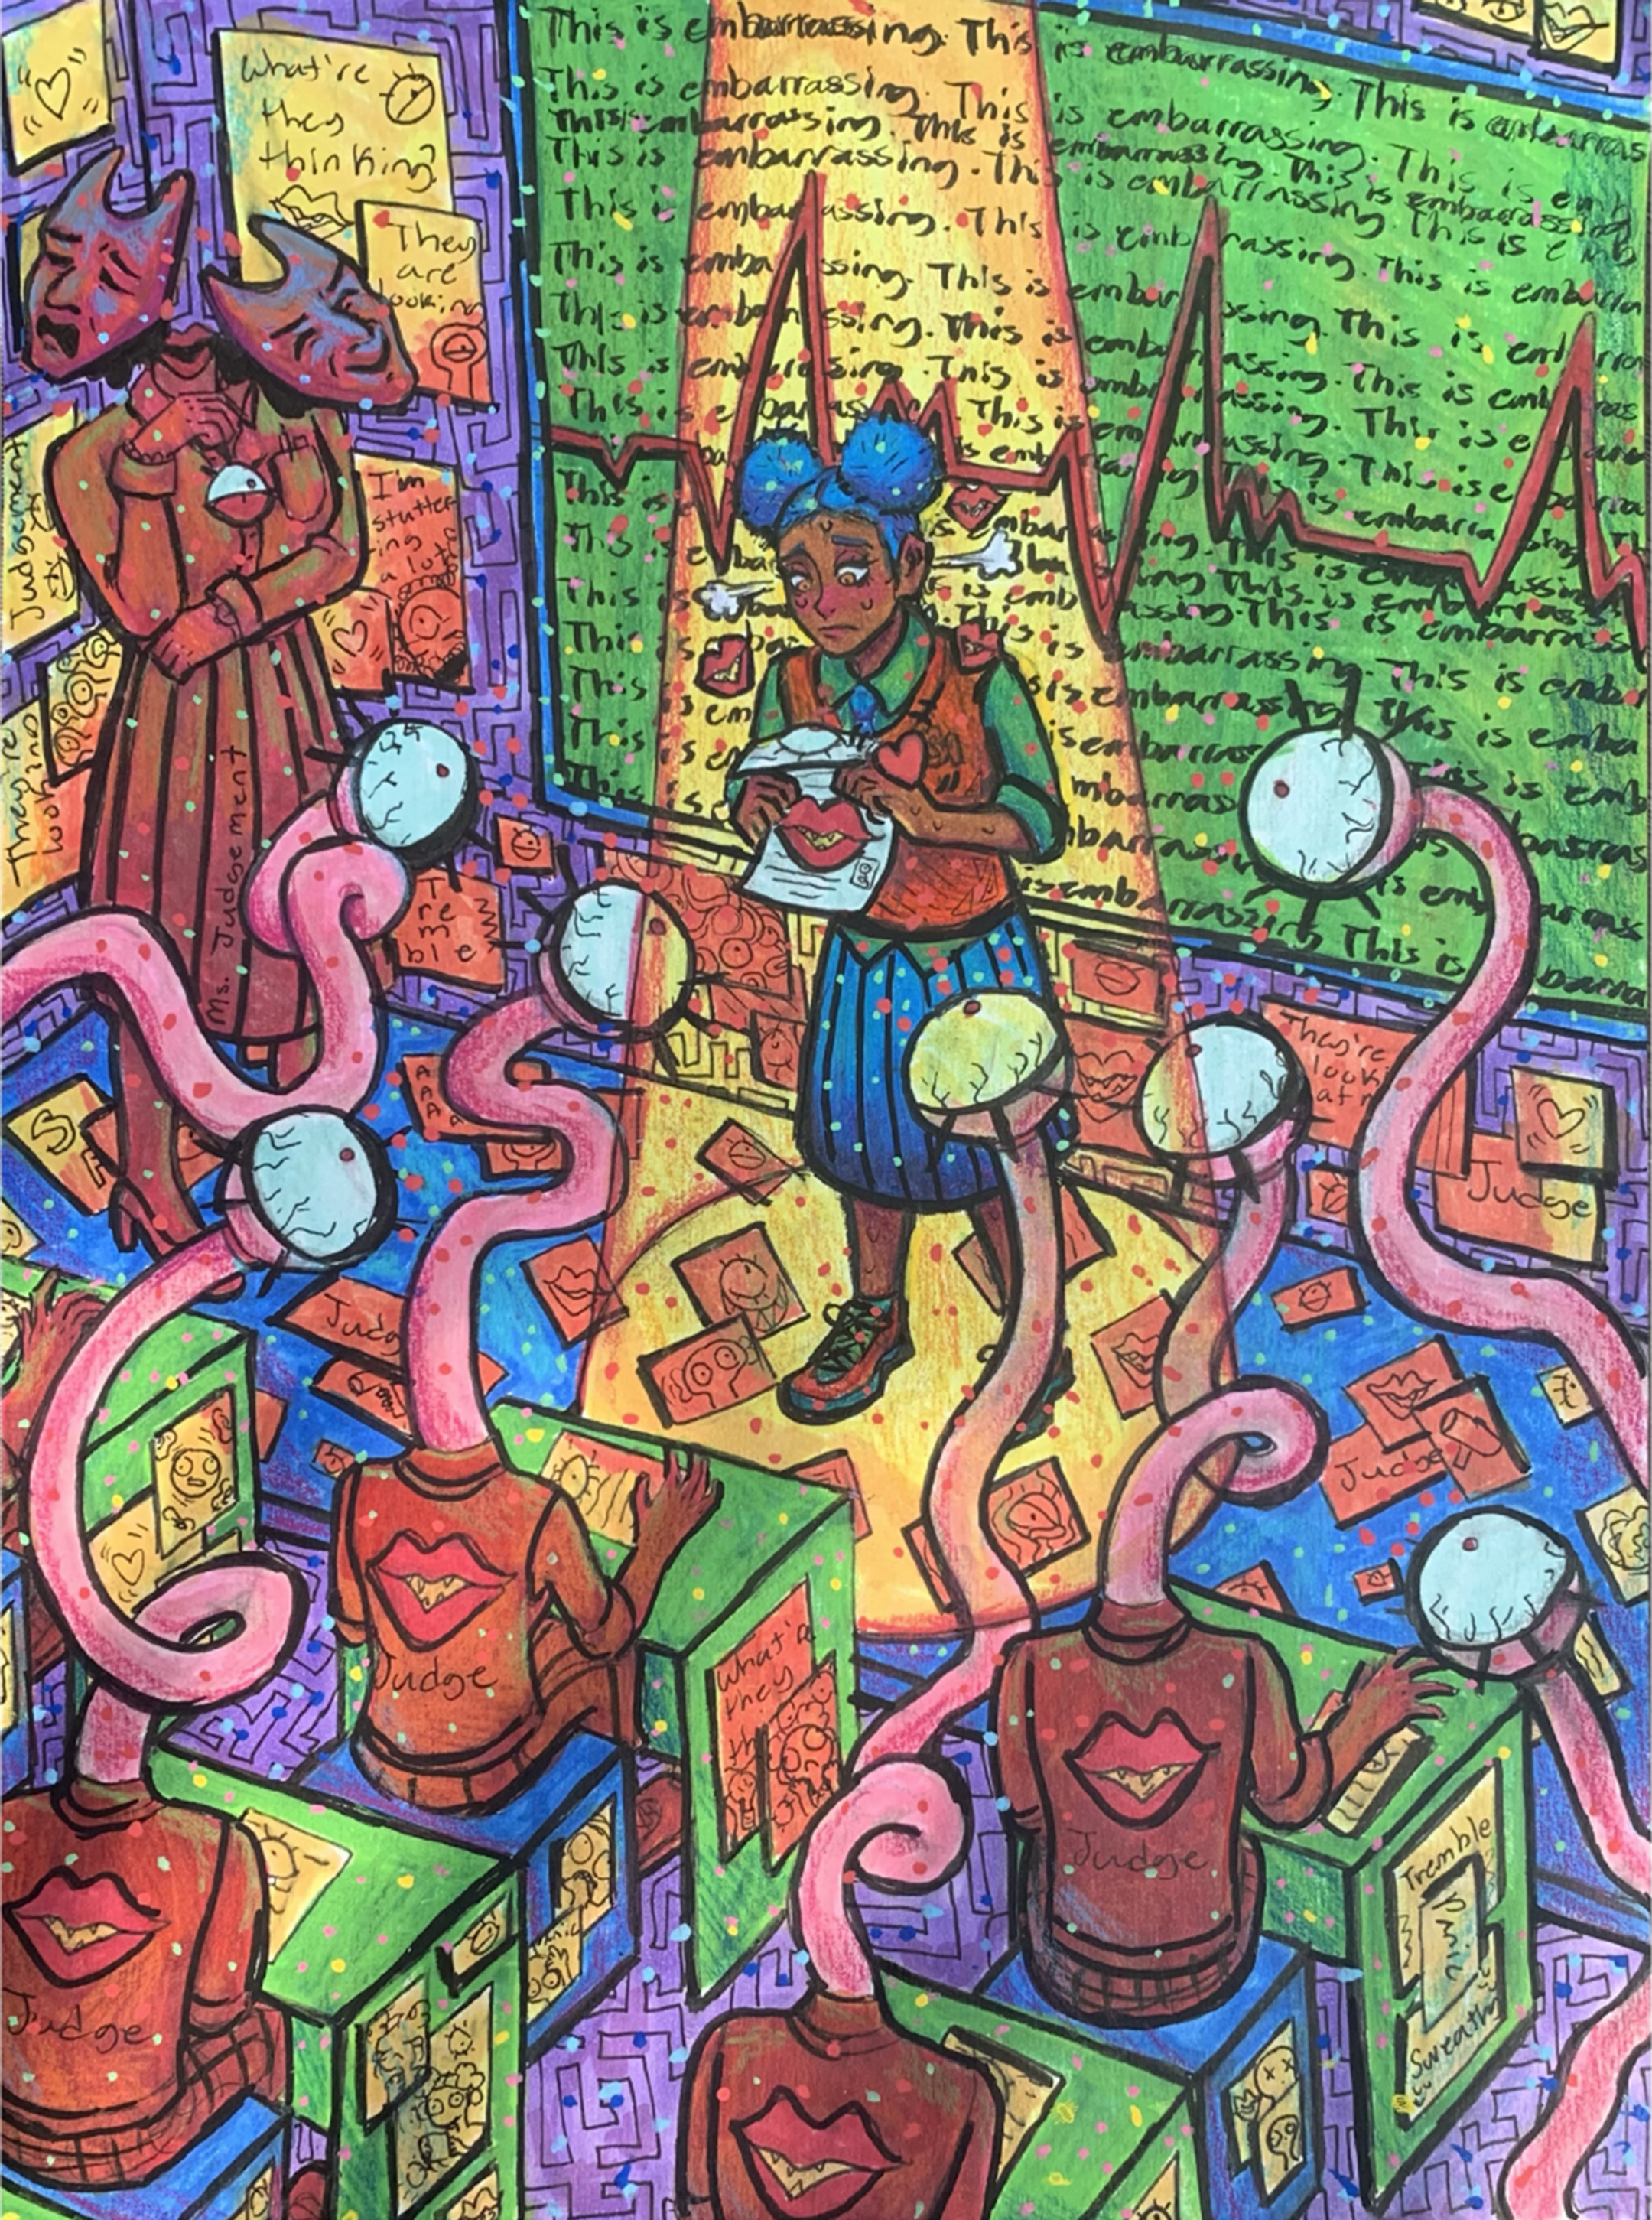 Cartoony, busy illustration depicting a young woman standing meekly at the front of a classroom where all the other students are humanoids with long, tentacle like heads topped by a giant eyeball